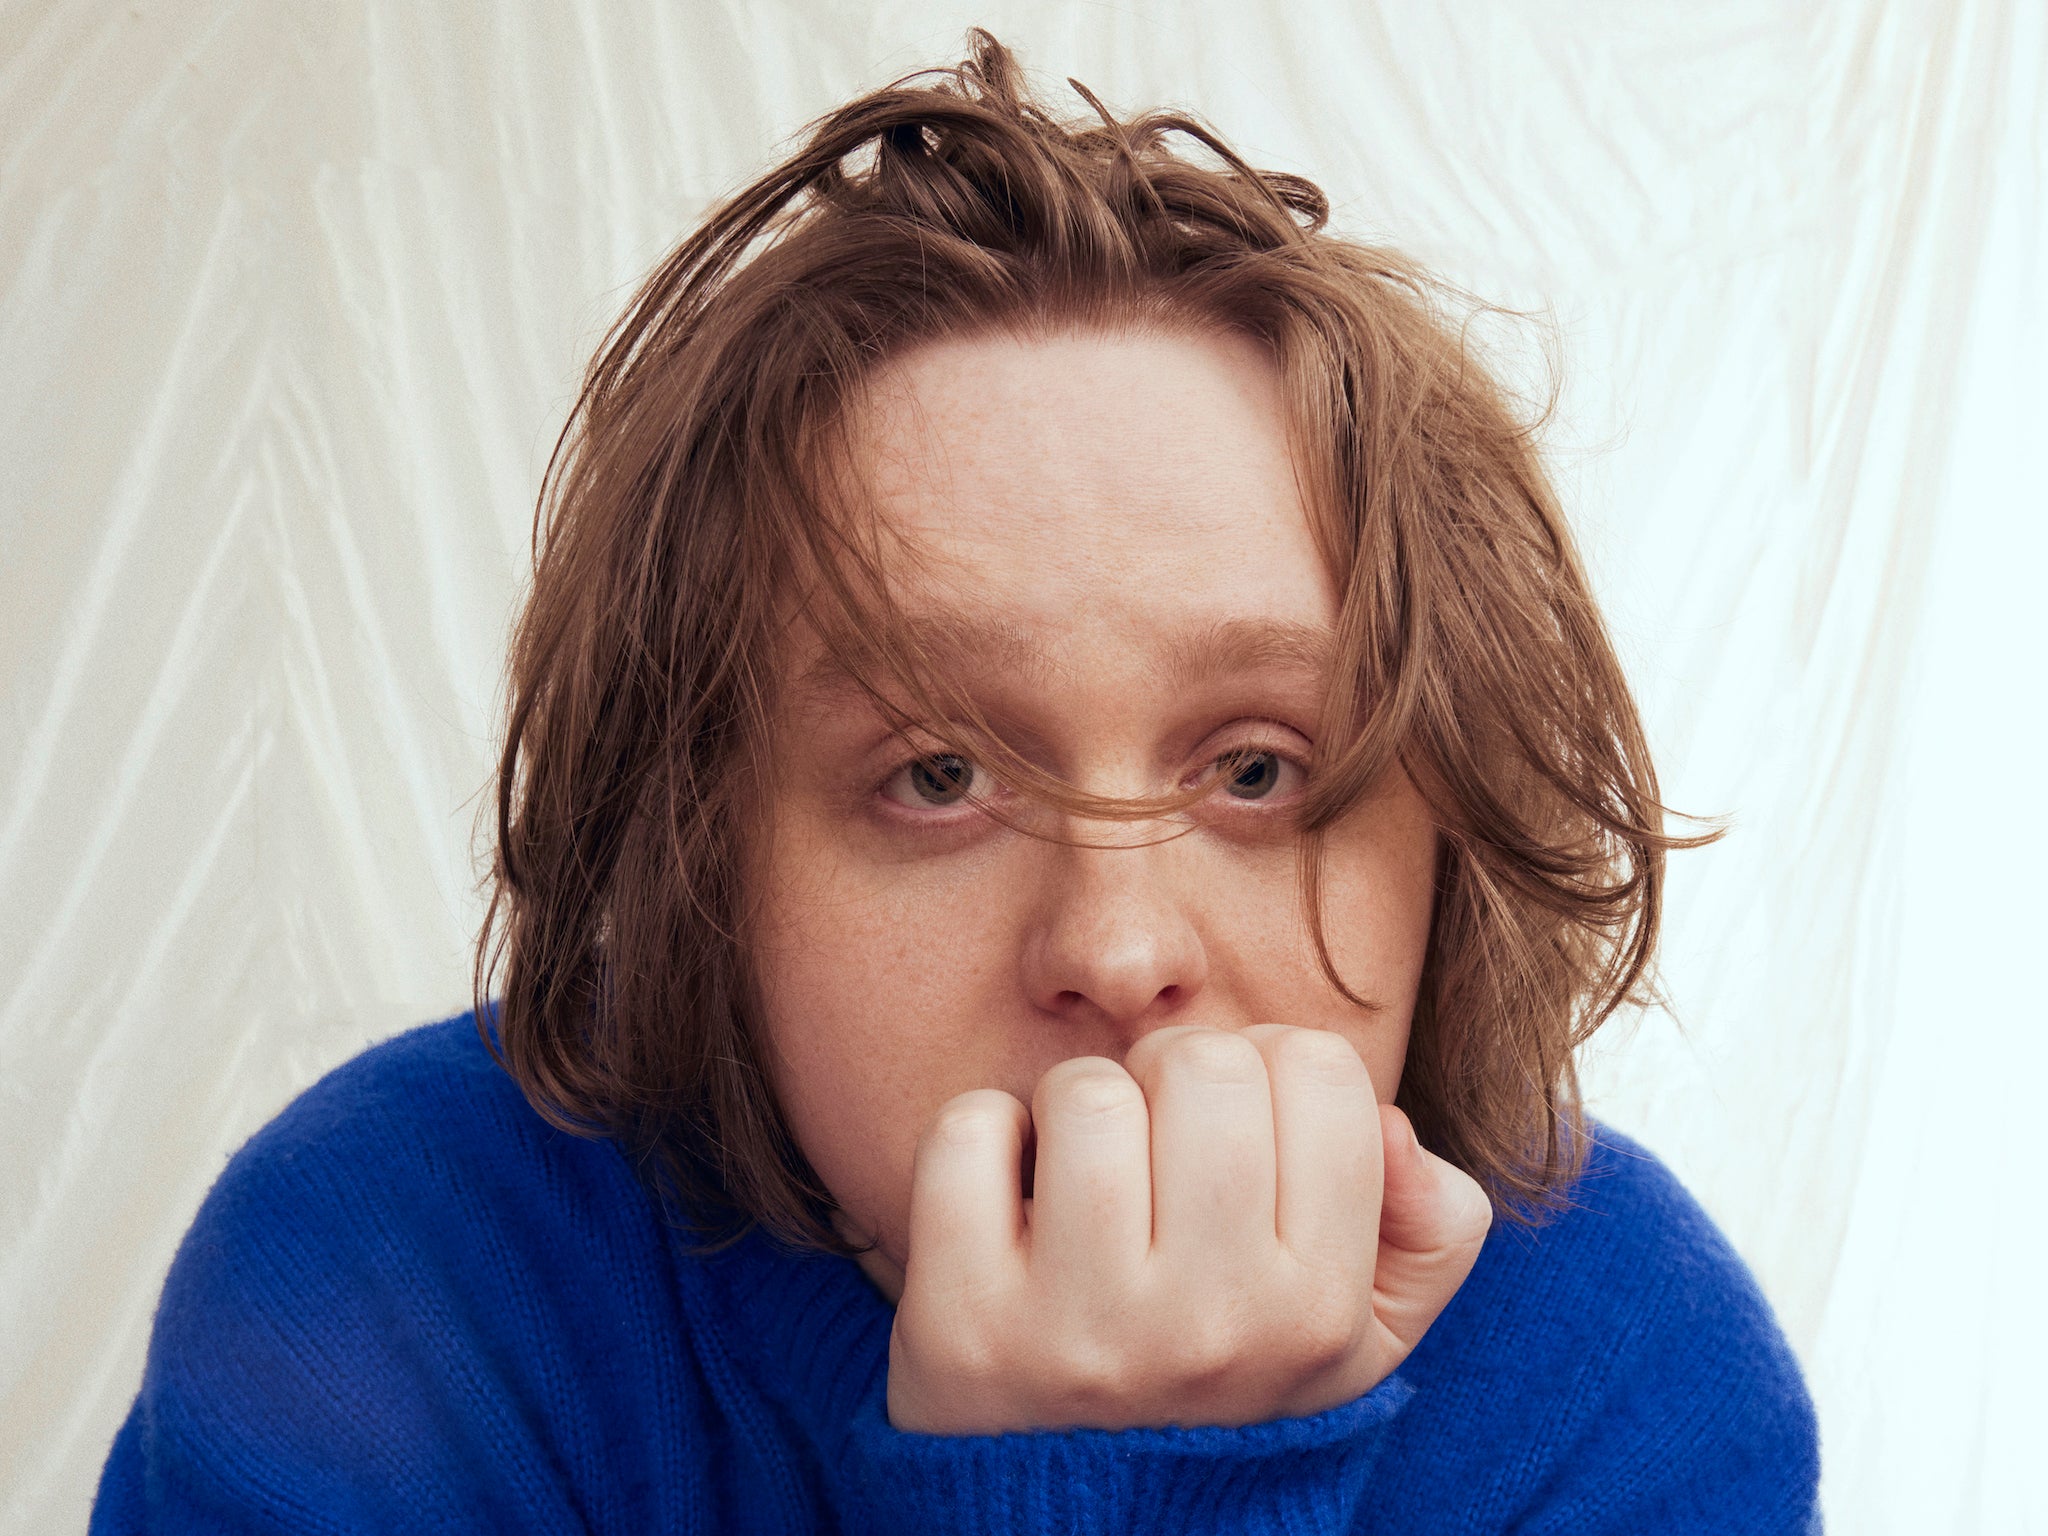 Lewis Capaldi releases his highly anticipated second album, a follow-up to his 2019 smash-hit debut